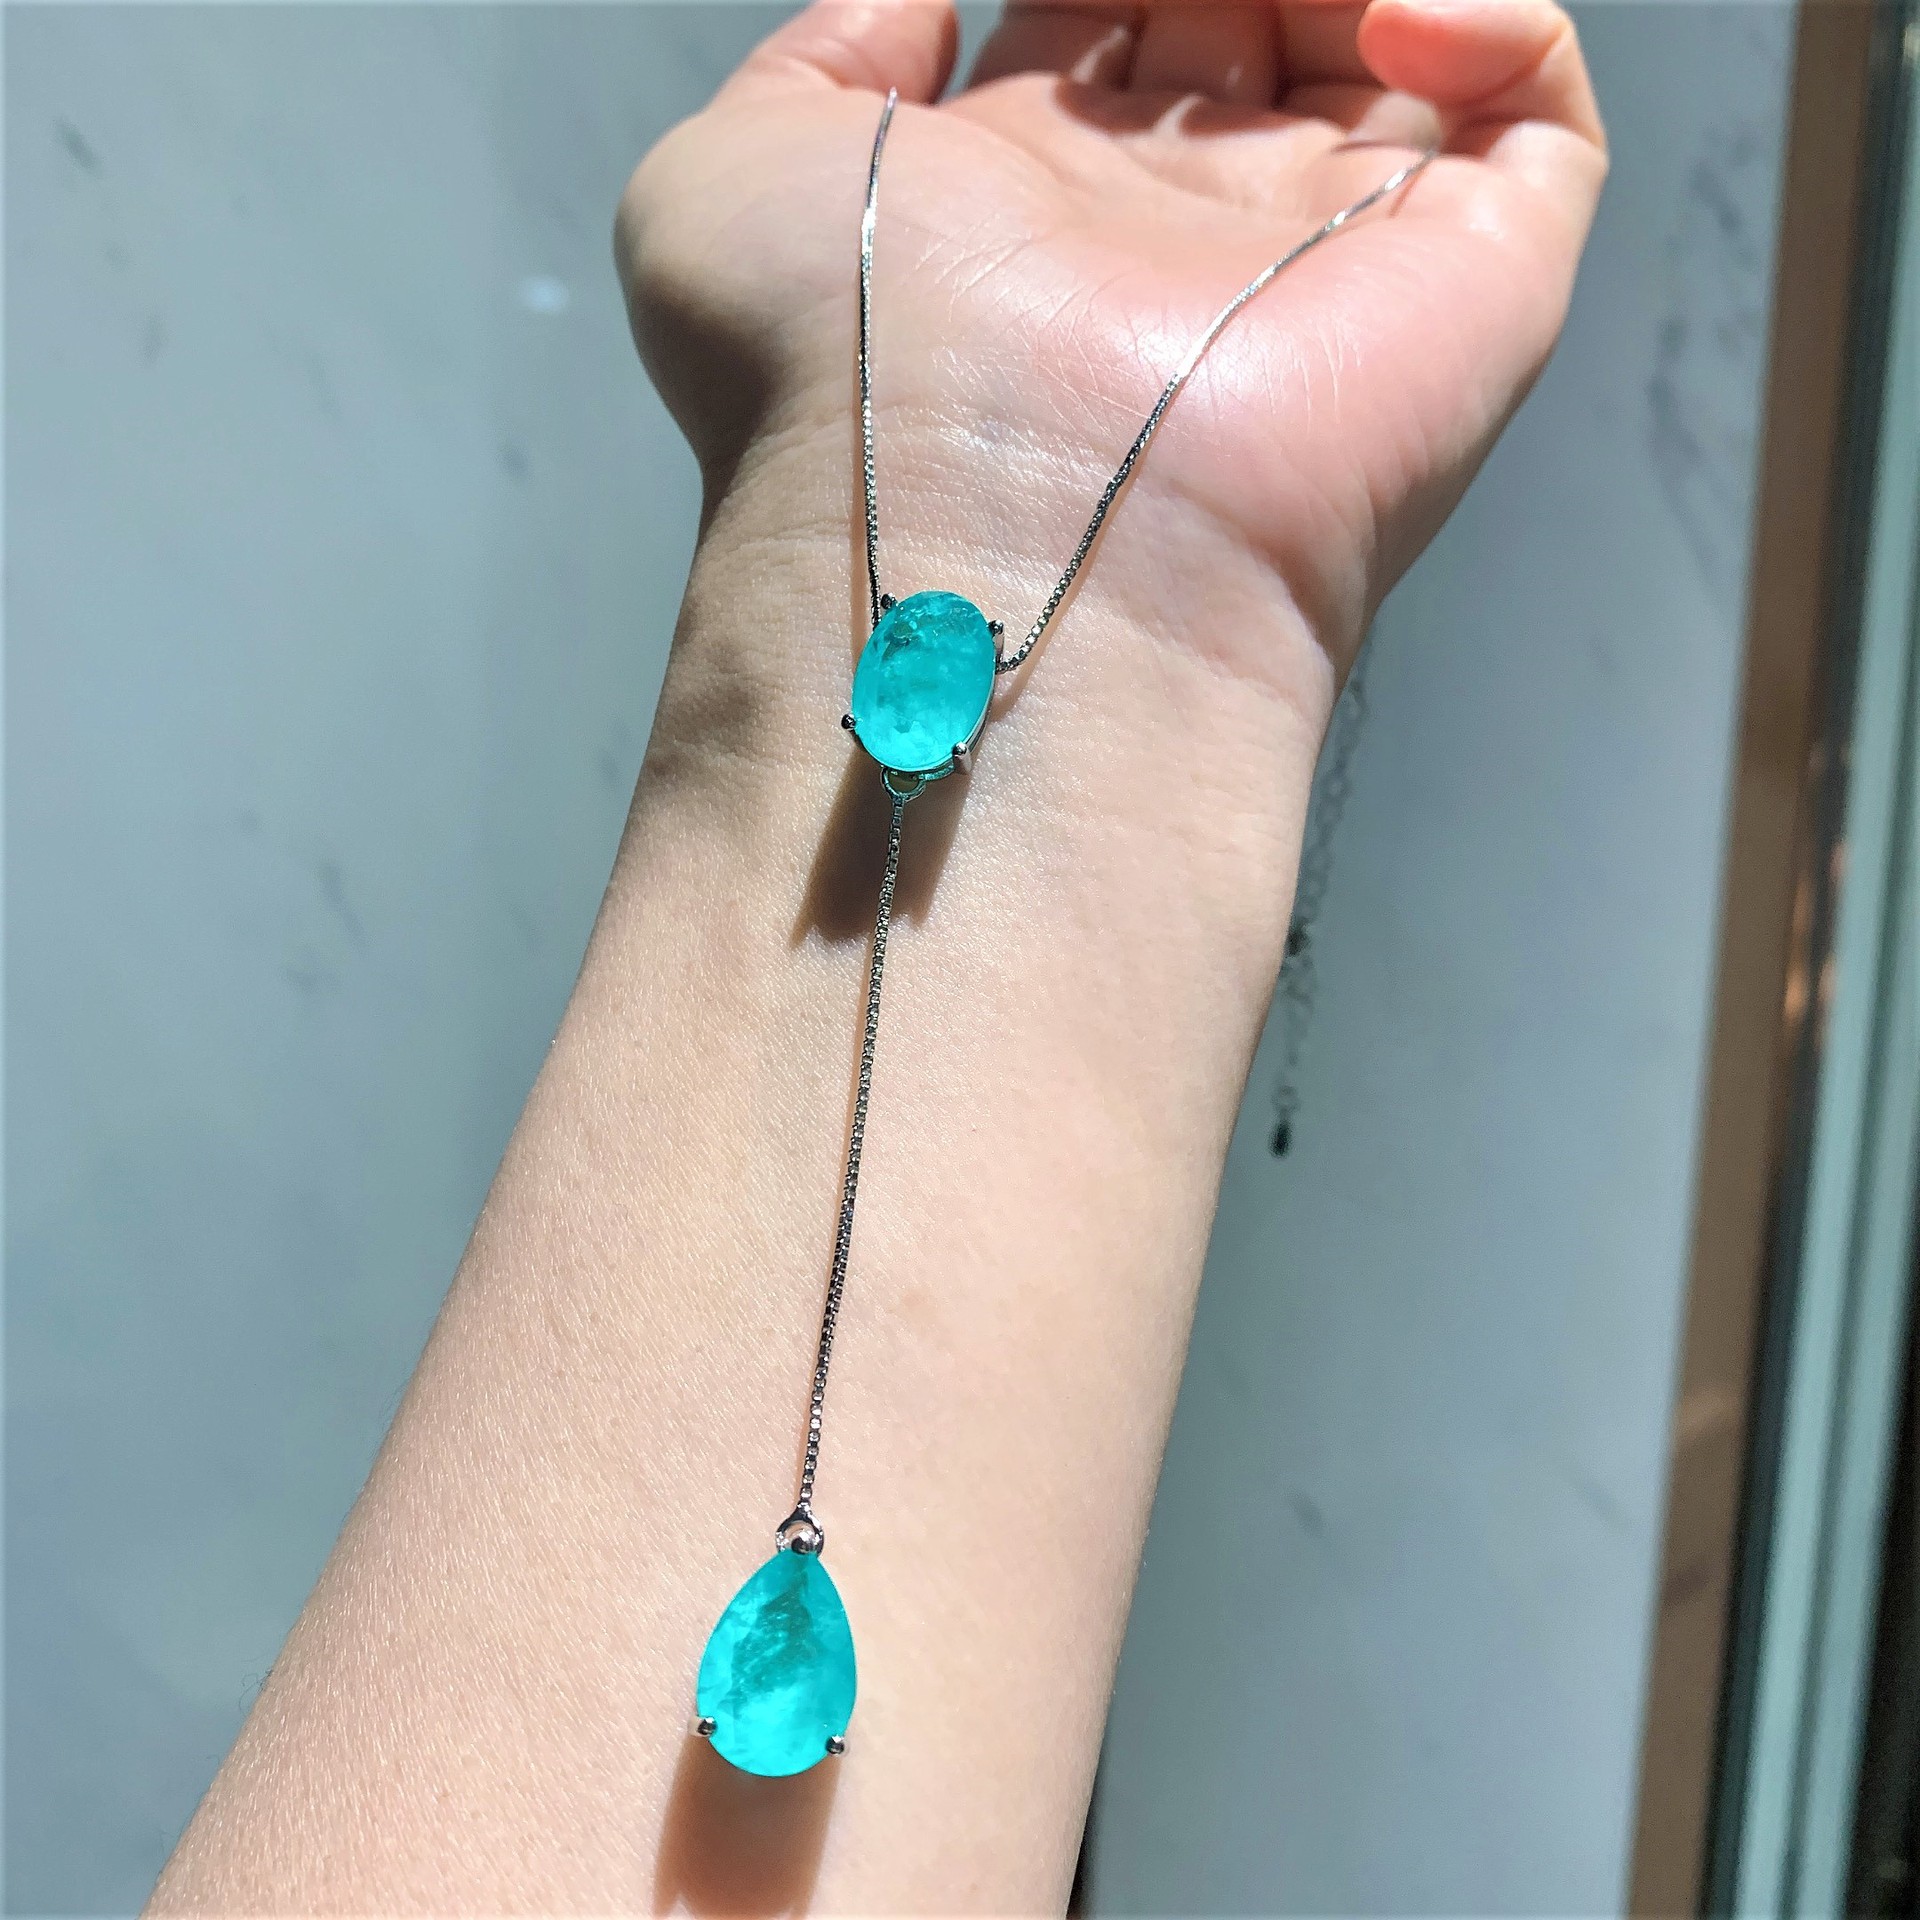 Zhuang Sheng Jewelry Simulation Colored Gems European and American Inlaid Imitation Paraiba Earrings 10*14 Pendant Necklace 10*14 Set